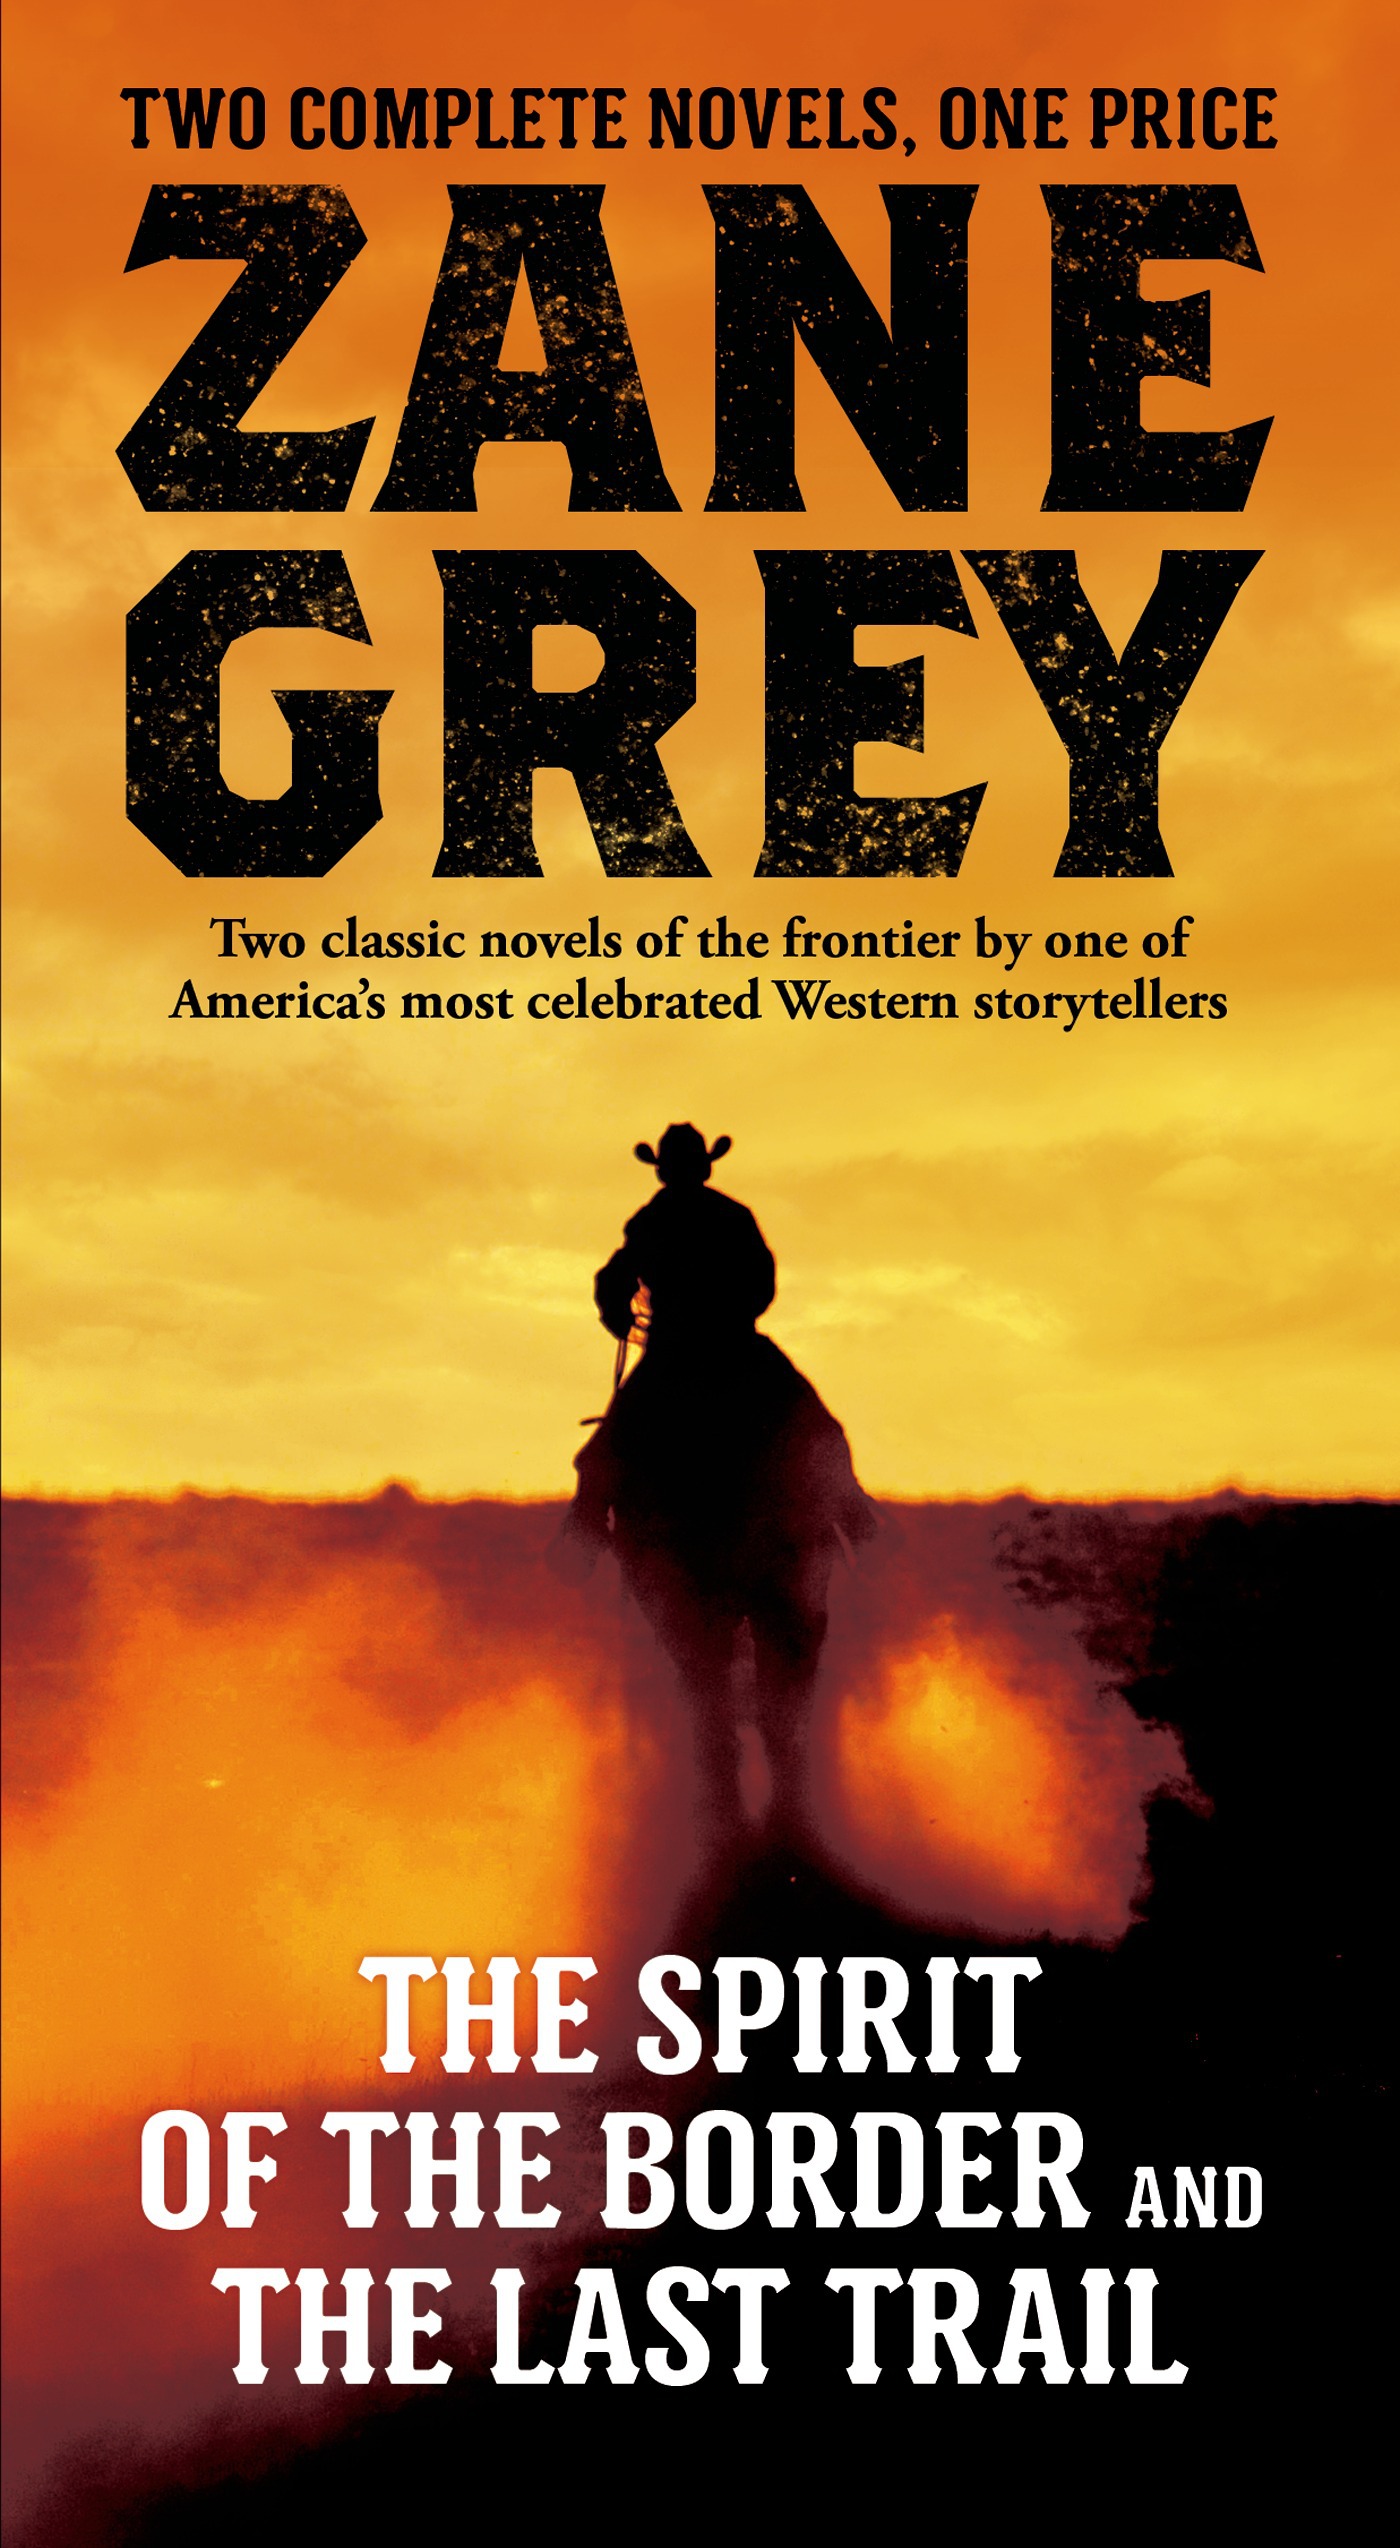 The Spirit of the Border and The Last Trail : Two Complete Zane Grey Novels by Zane Grey